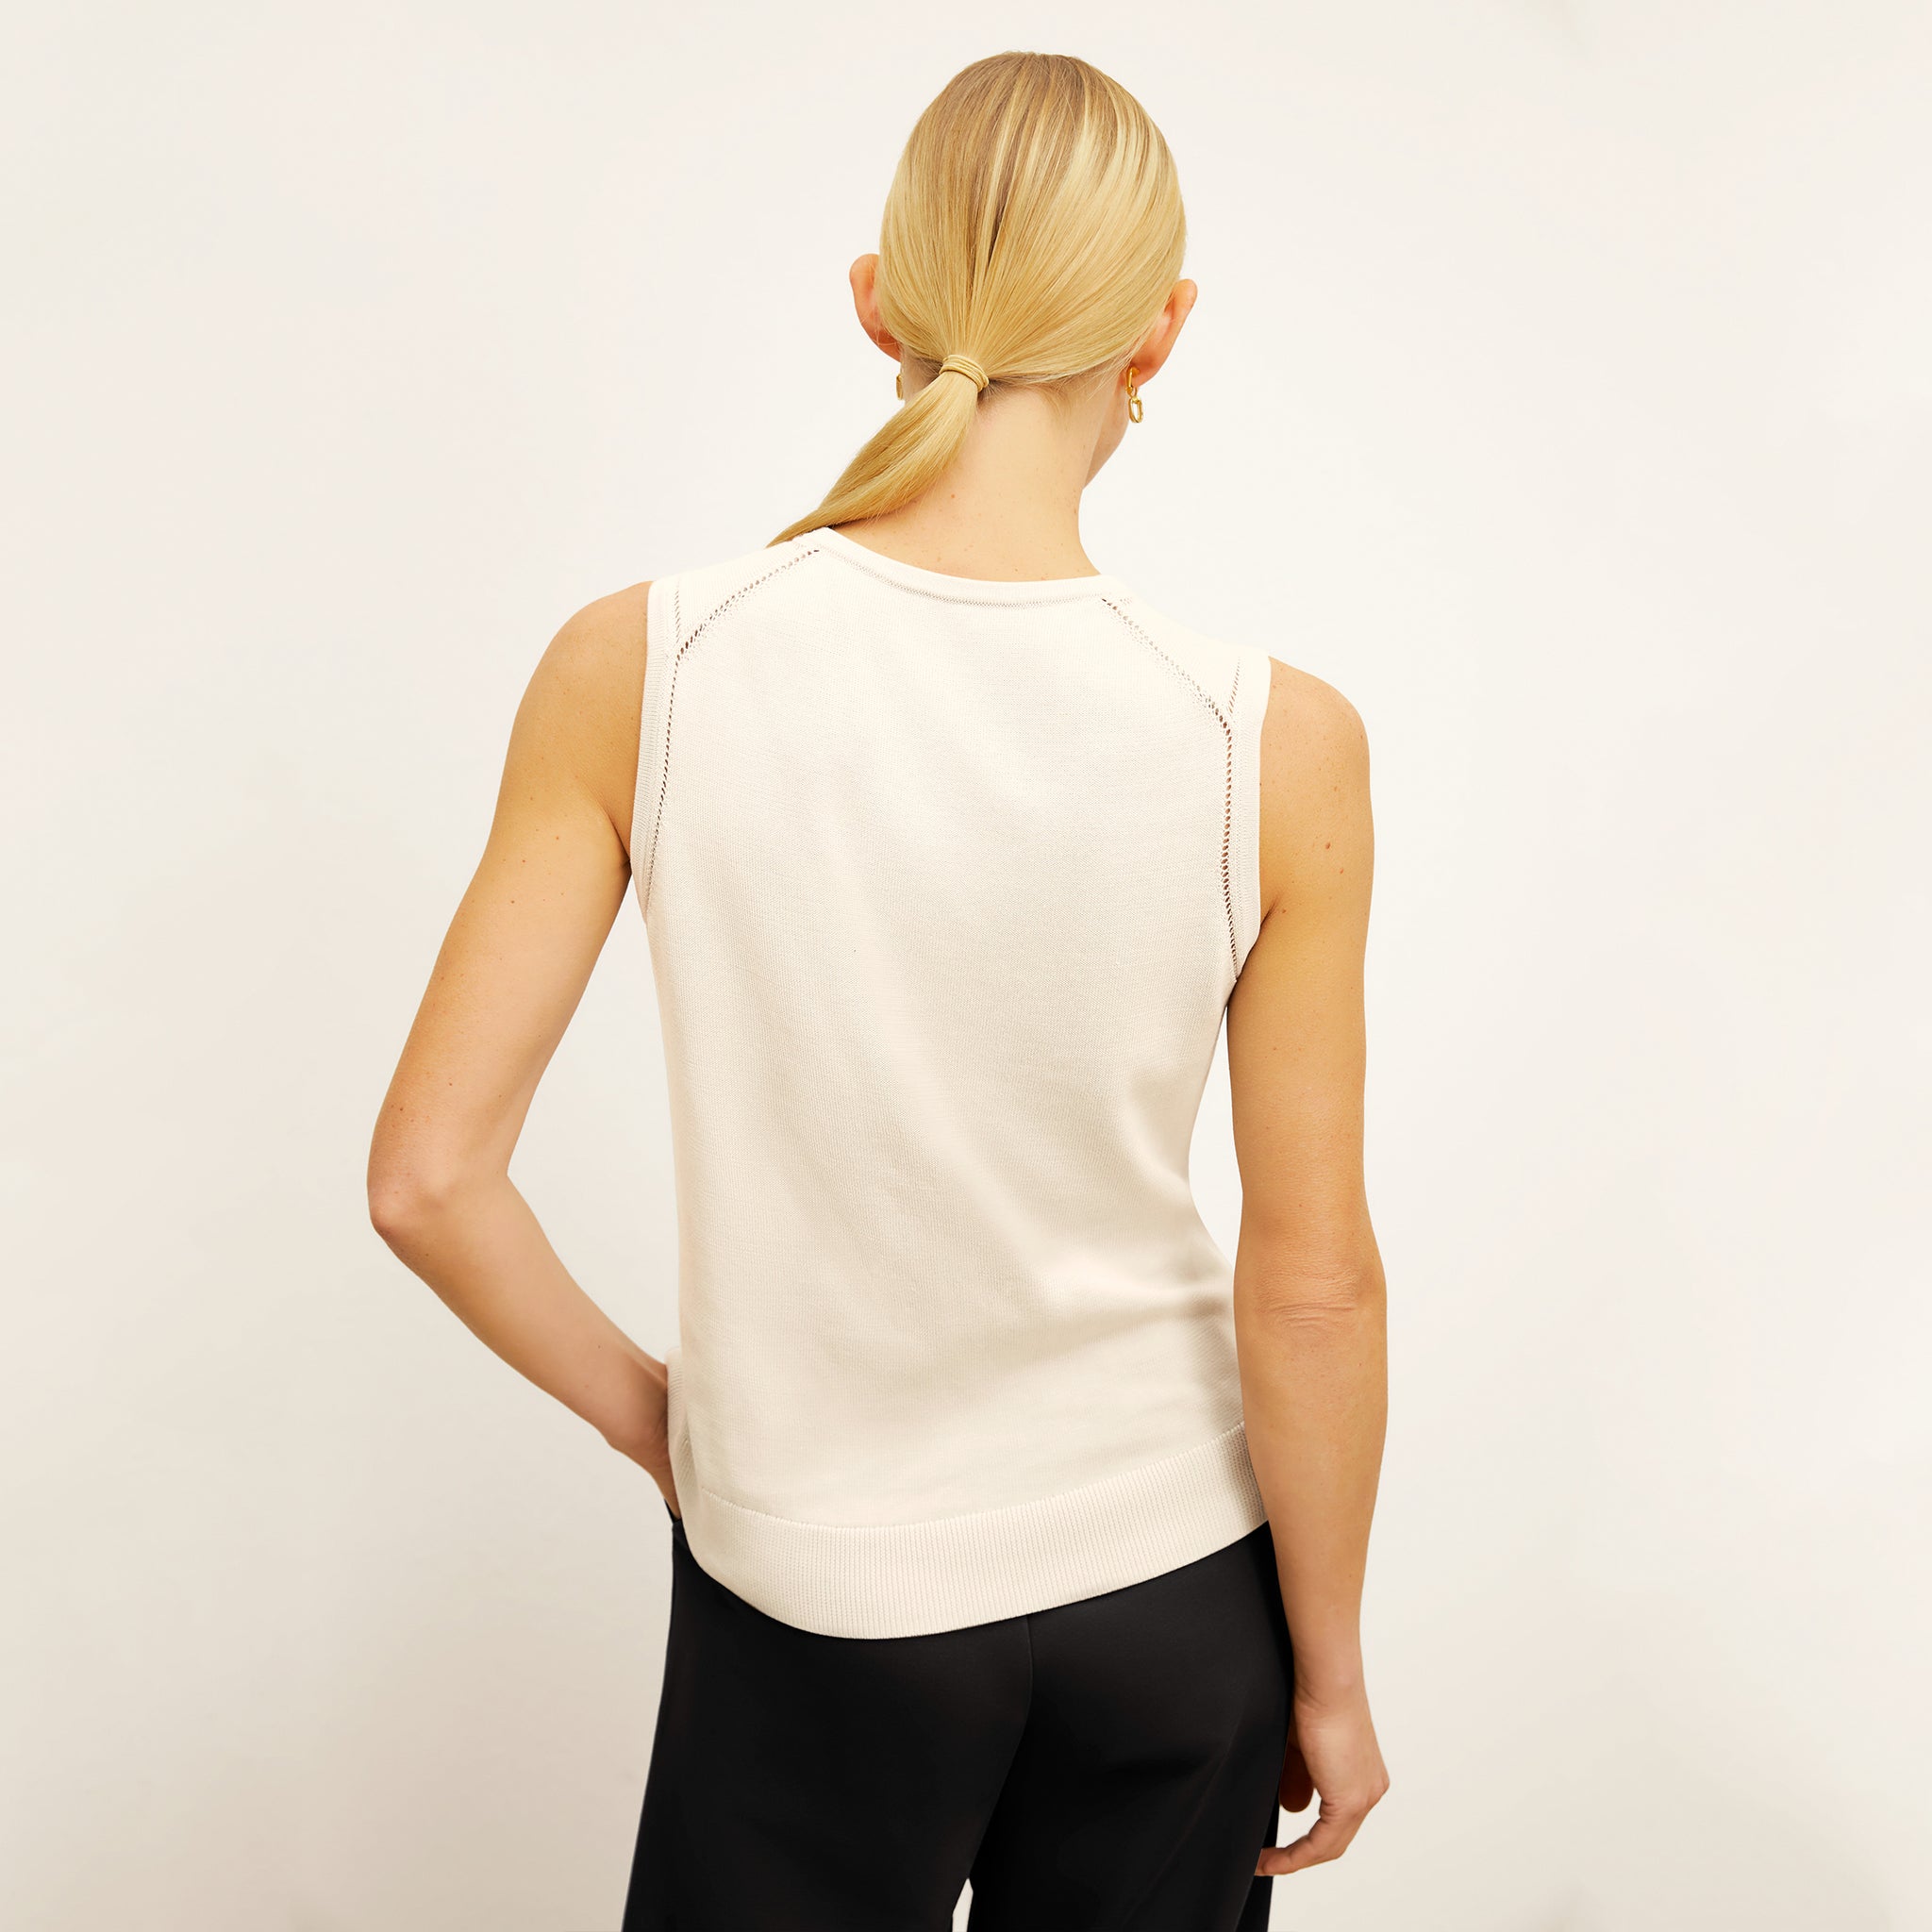 back image of a woman wearing the crimmins top in ivory